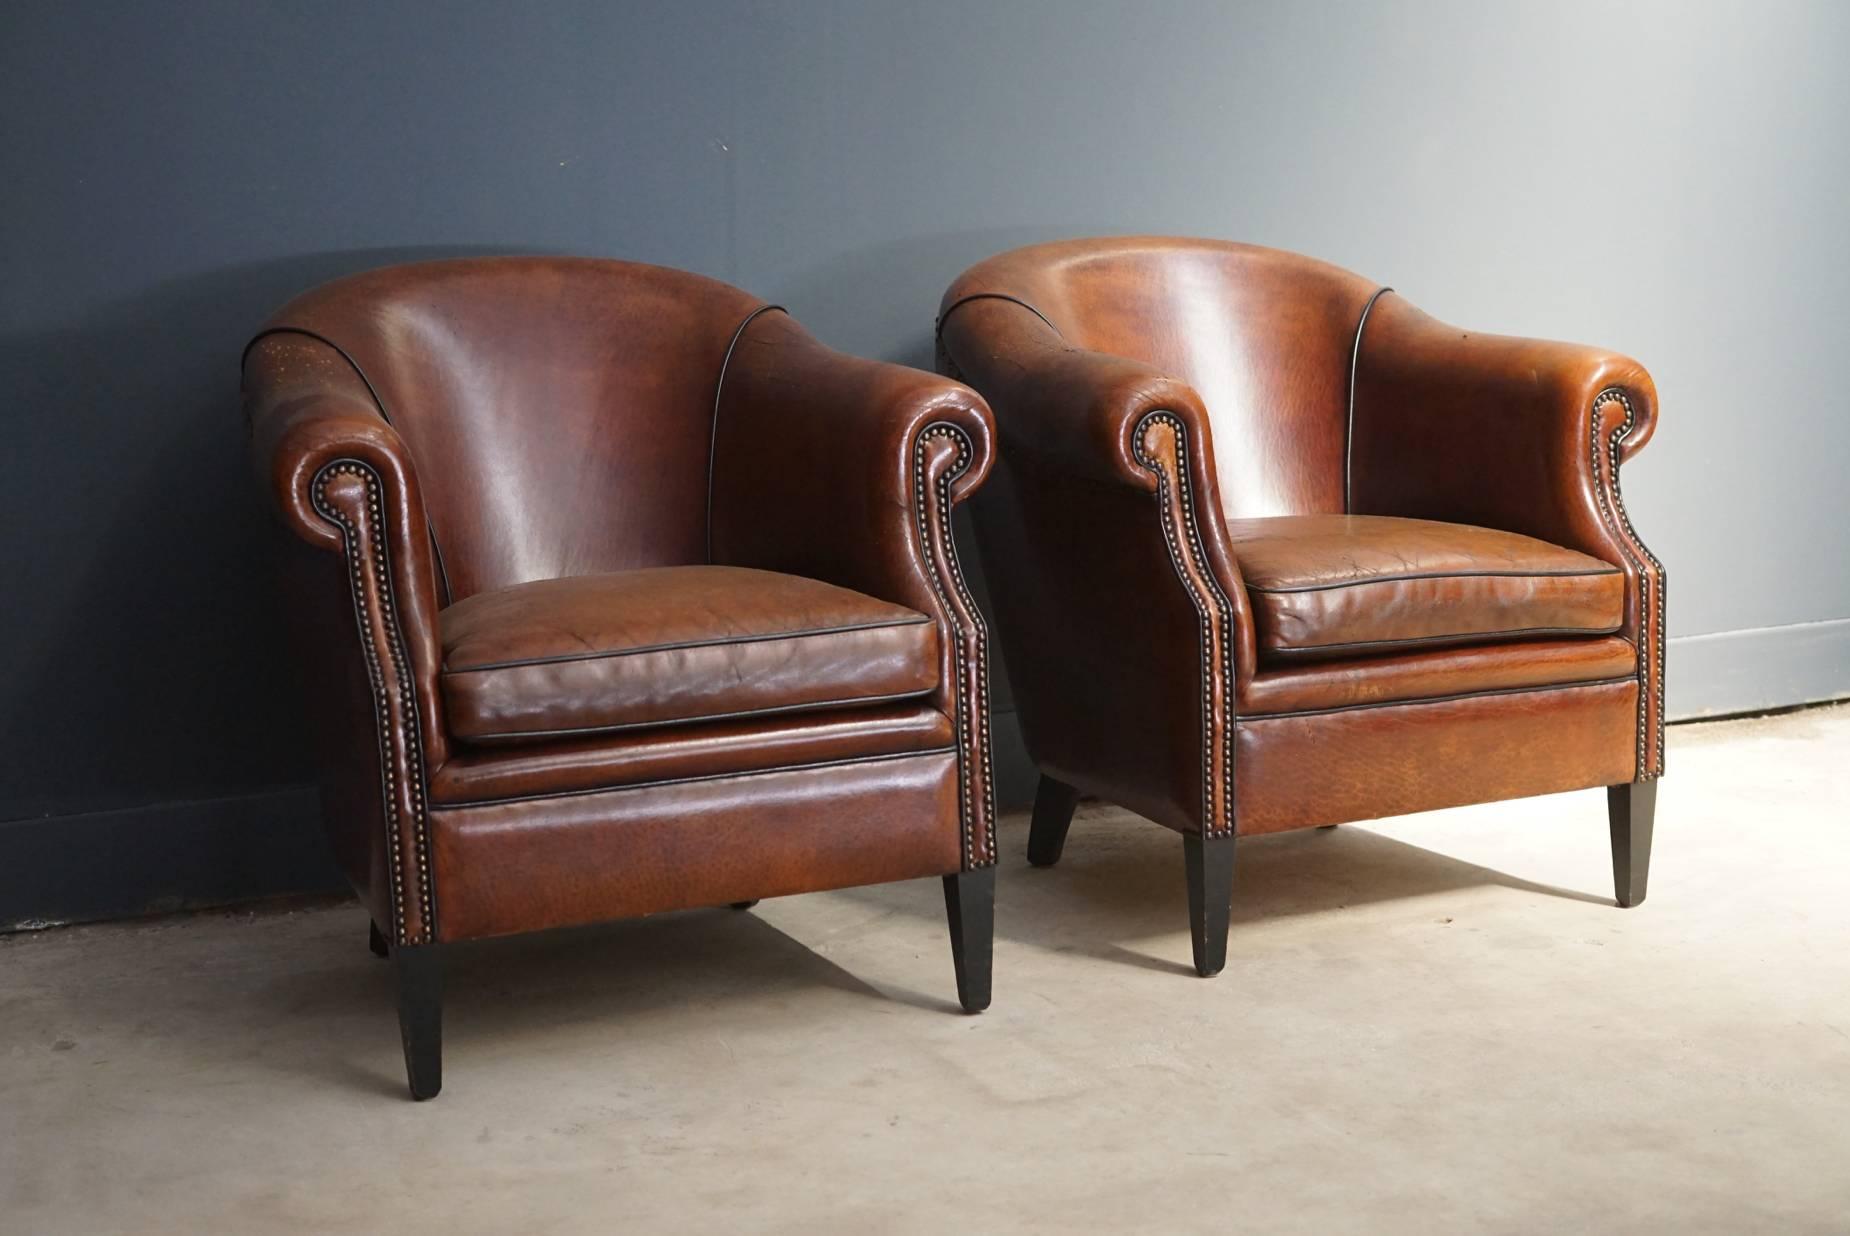 These club chairs were designed and produced in the Netherlands during the second half of the 20th century. The chairs are made from cognac leather held together with metal pins and mounted on wooden legs. The lounge chairs are in a vintage well